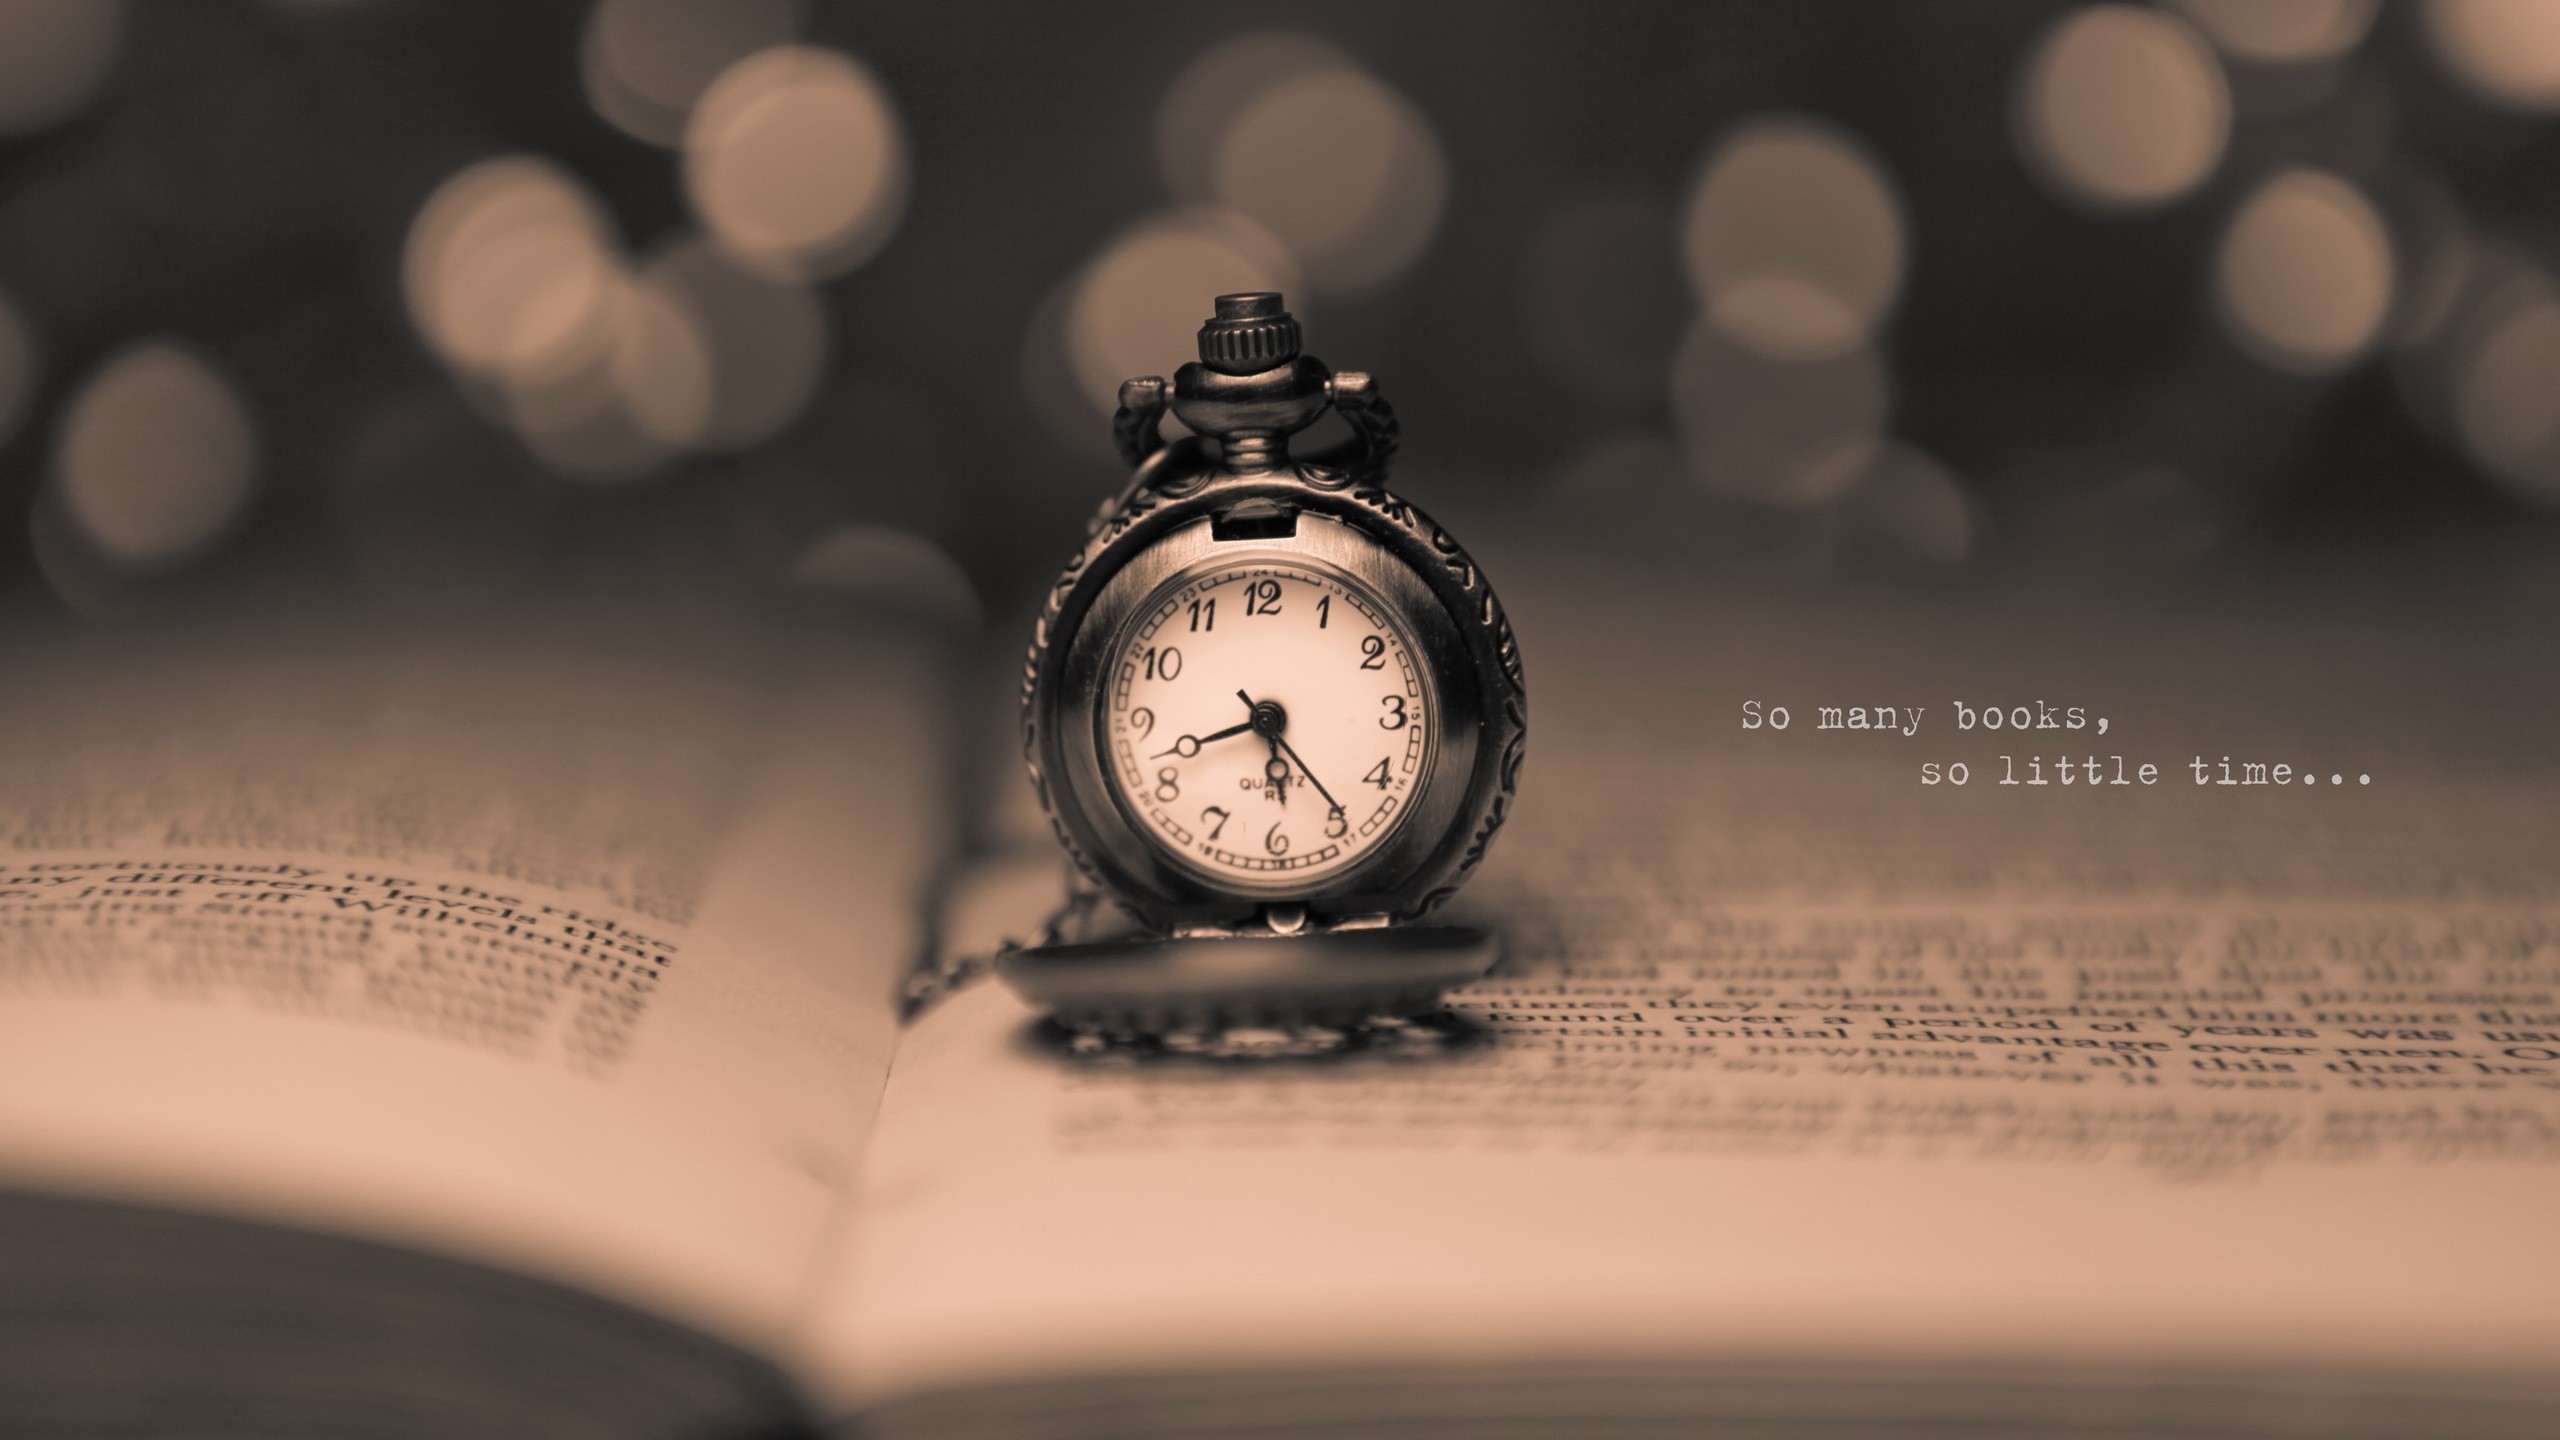 General 2560x1440 sepia books watch pocket watch text quote depth of field bokeh numbers time quartz technology